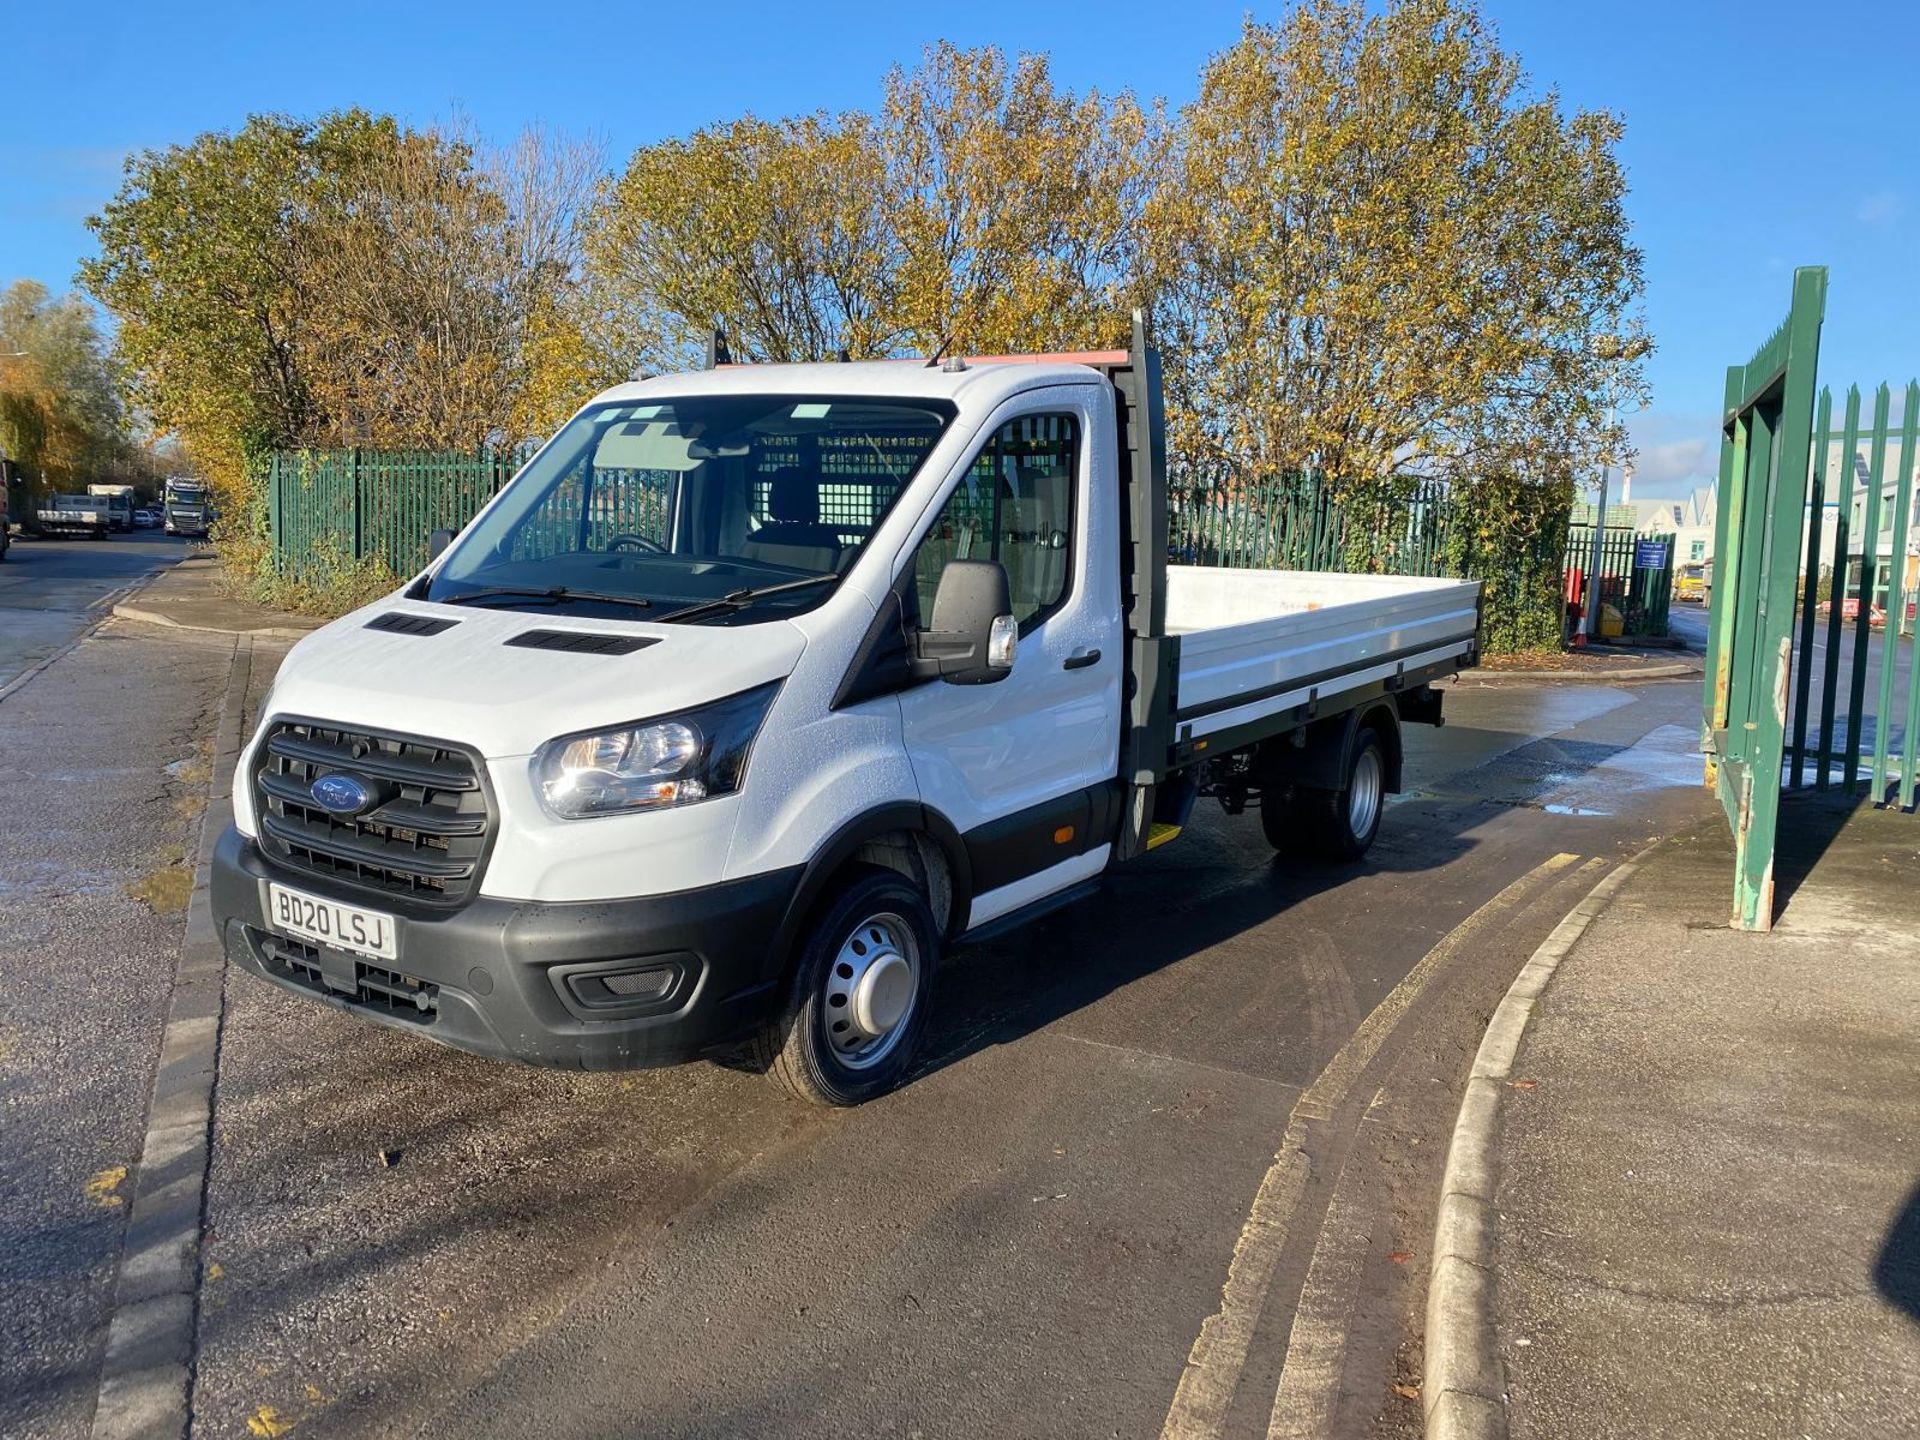 2020 FORD TRANSIT 350: RUGGED ELEGANCE IN A TWIN-WHEEL DROPSIDE - Image 2 of 12